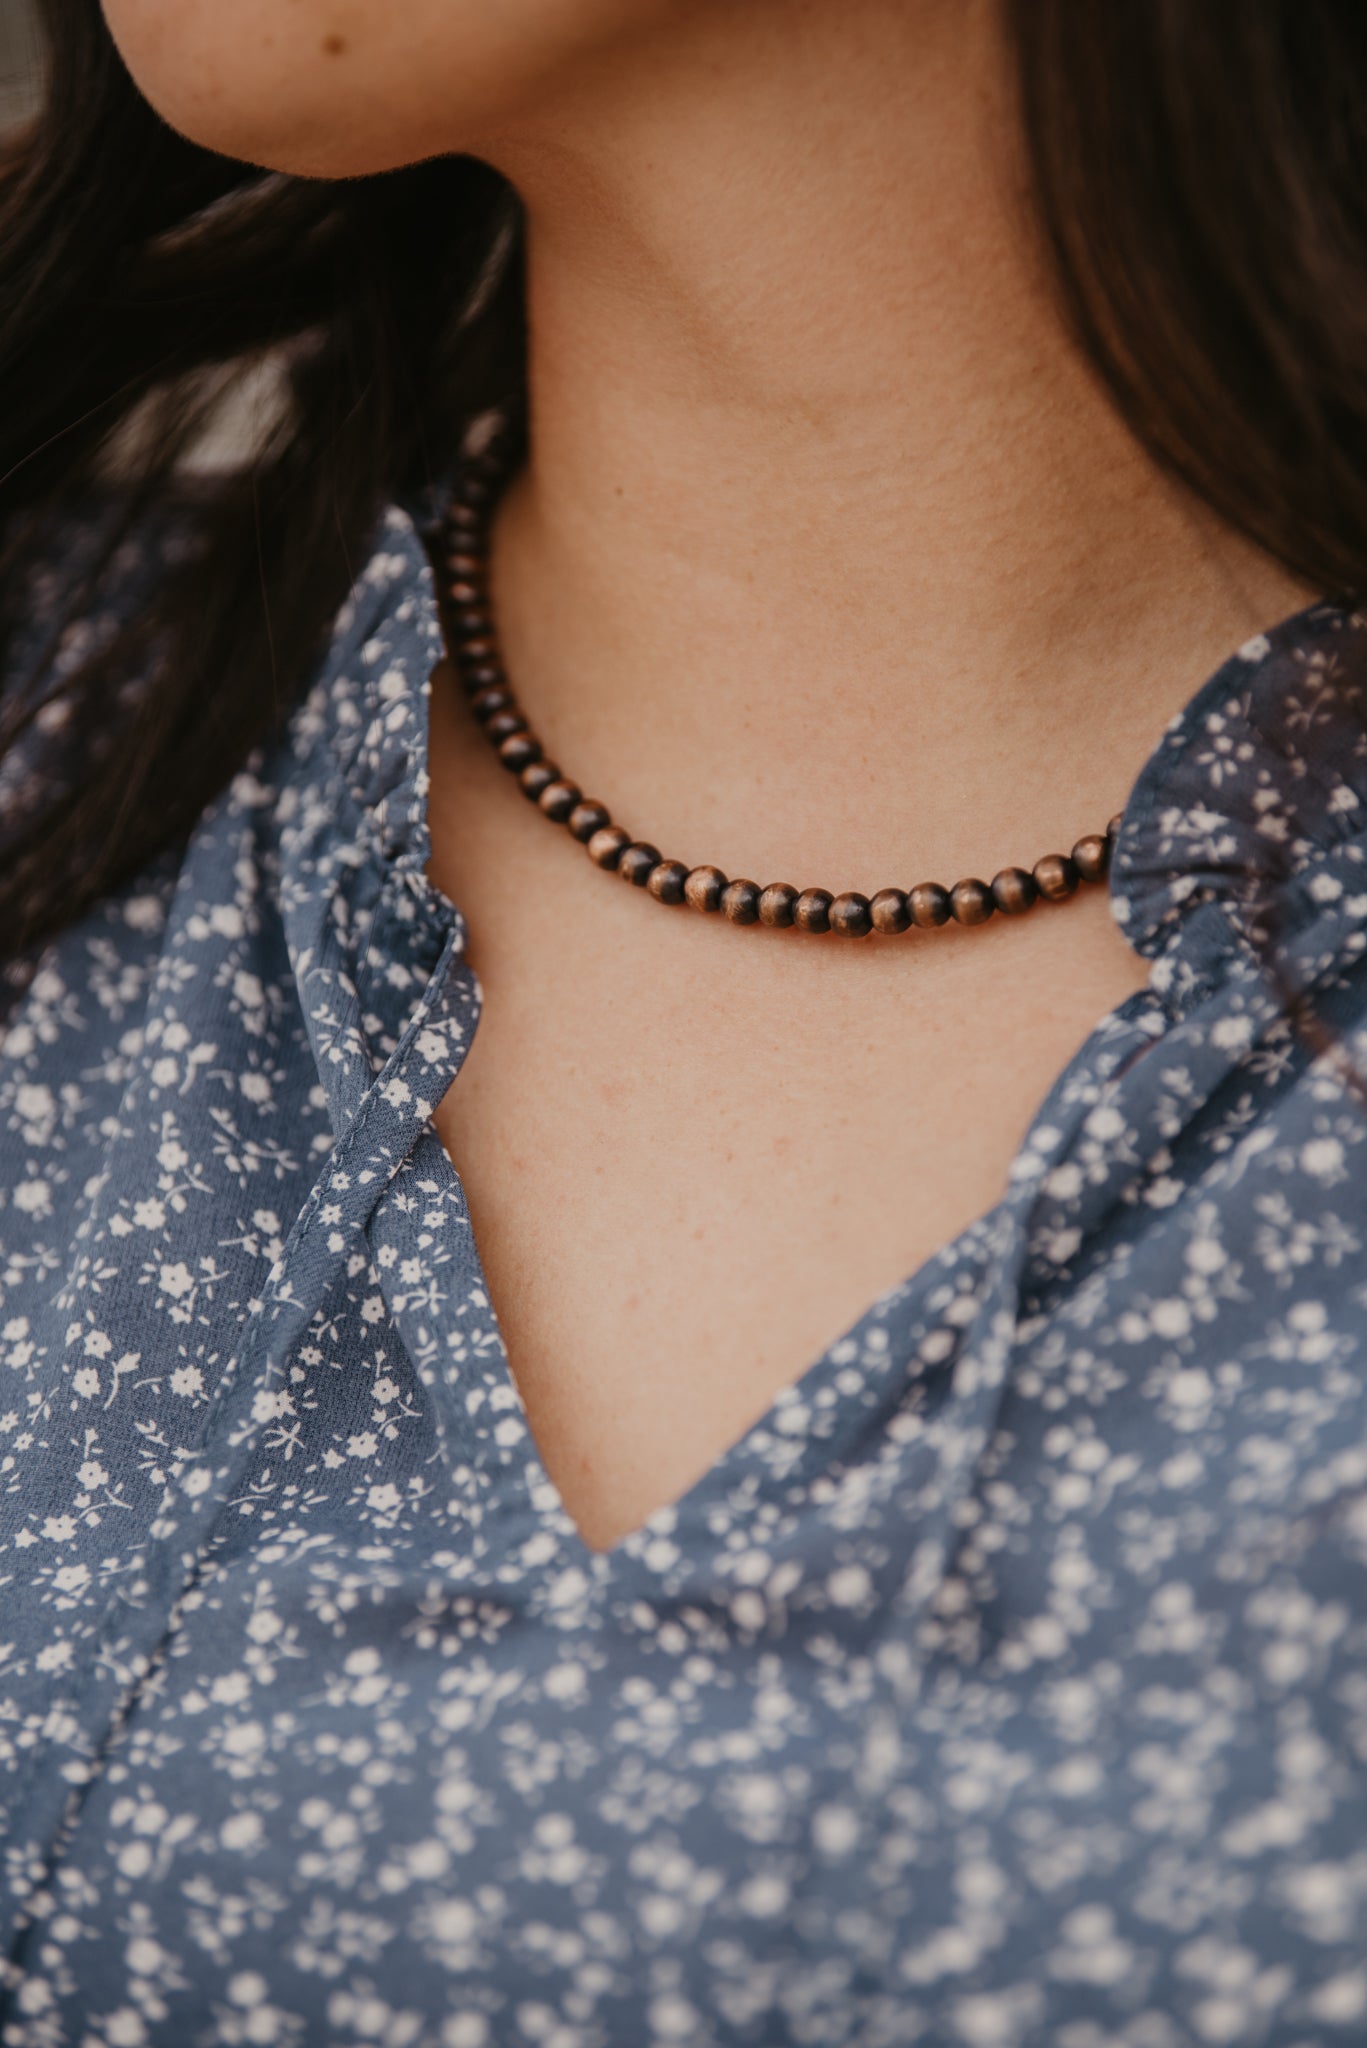 The Lacey Copper Choker